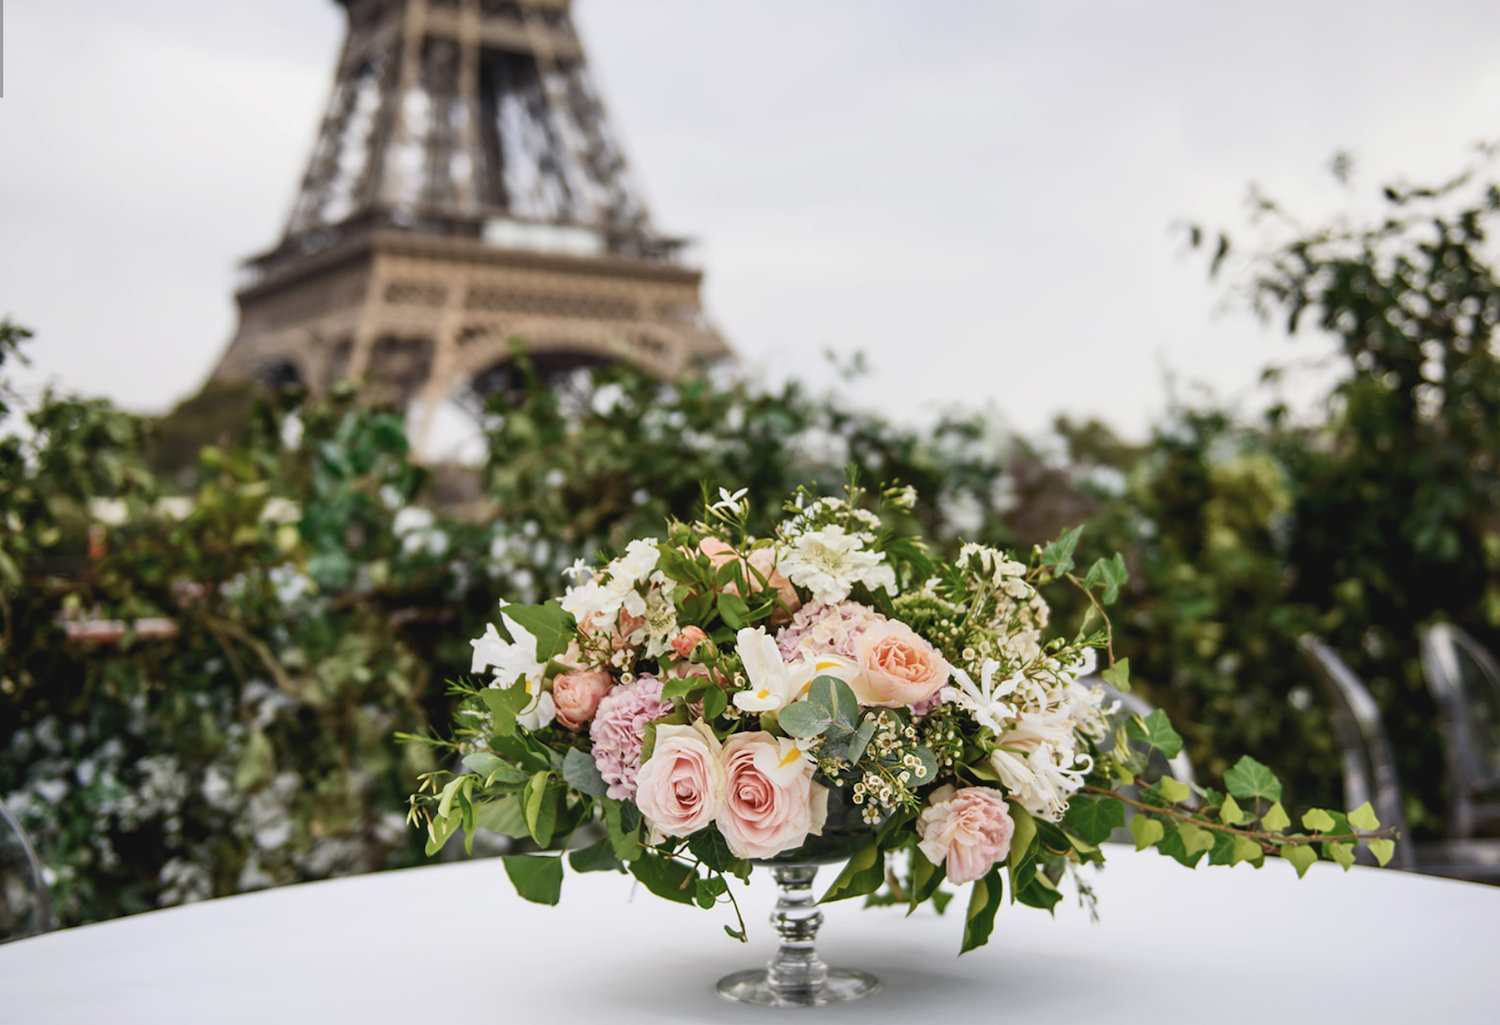 Paris river cruise peony floral decor with Eiffel Tower view